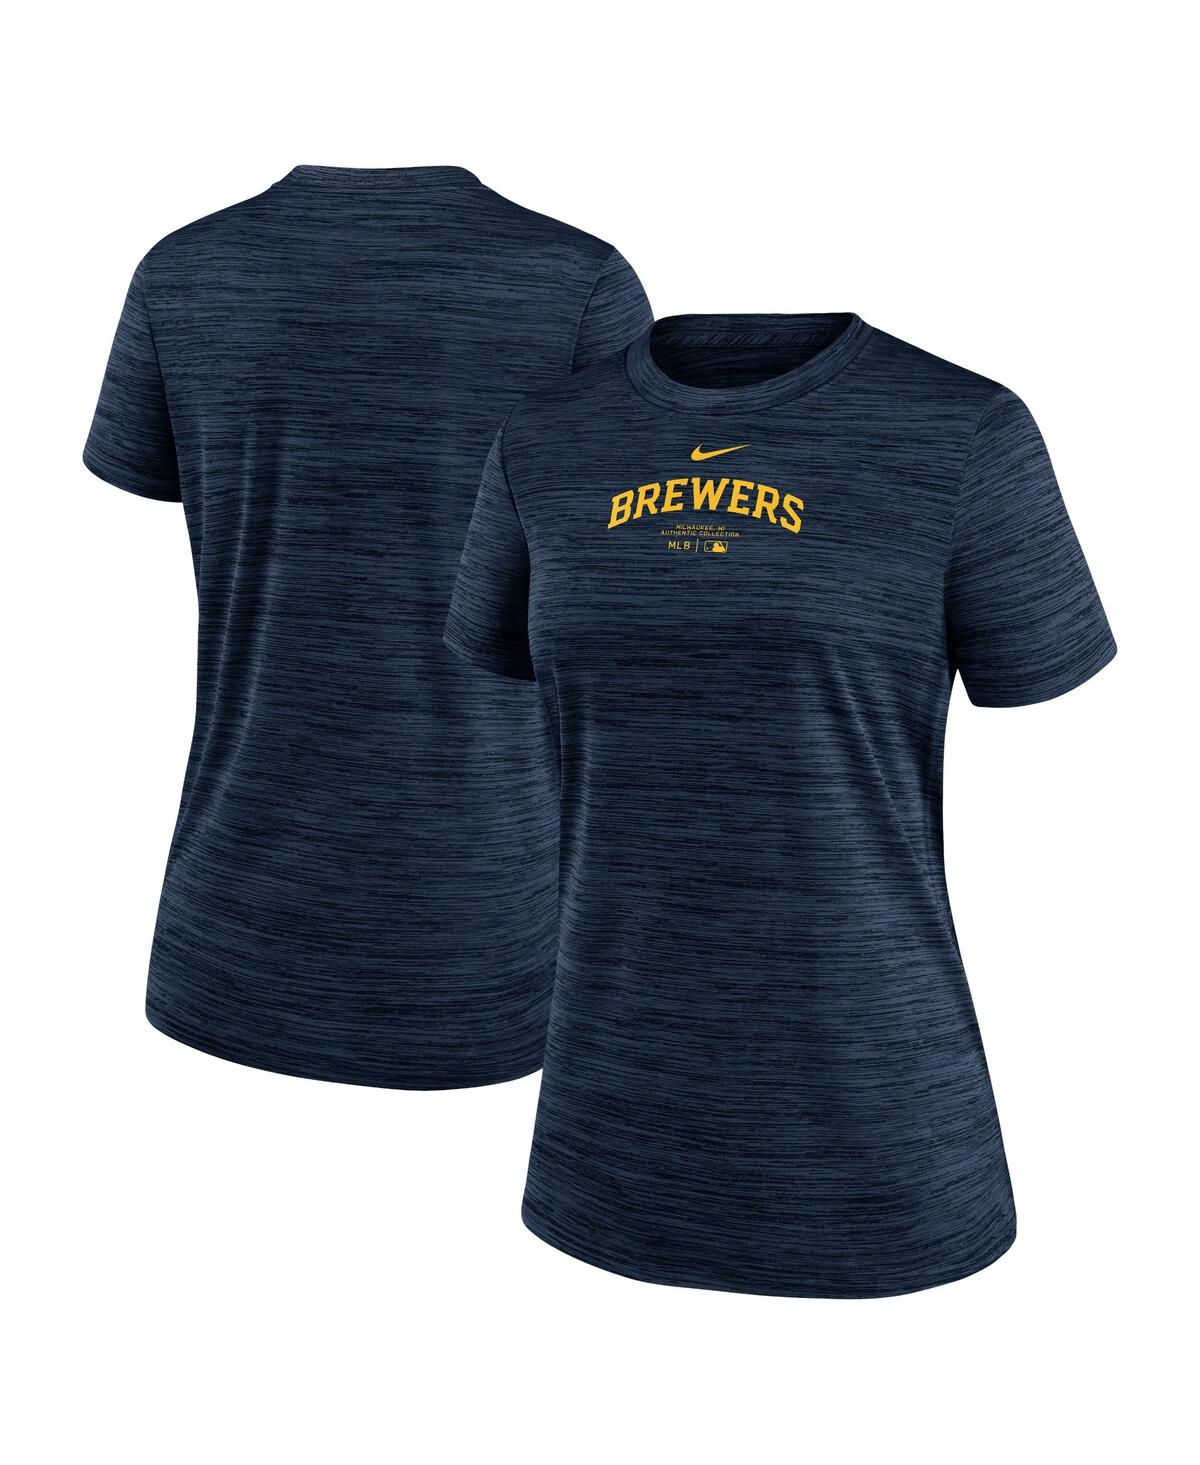 Women's Nike Navy Milwaukee Brewers Authentic Collection Velocity Performance T-shirt - Navy